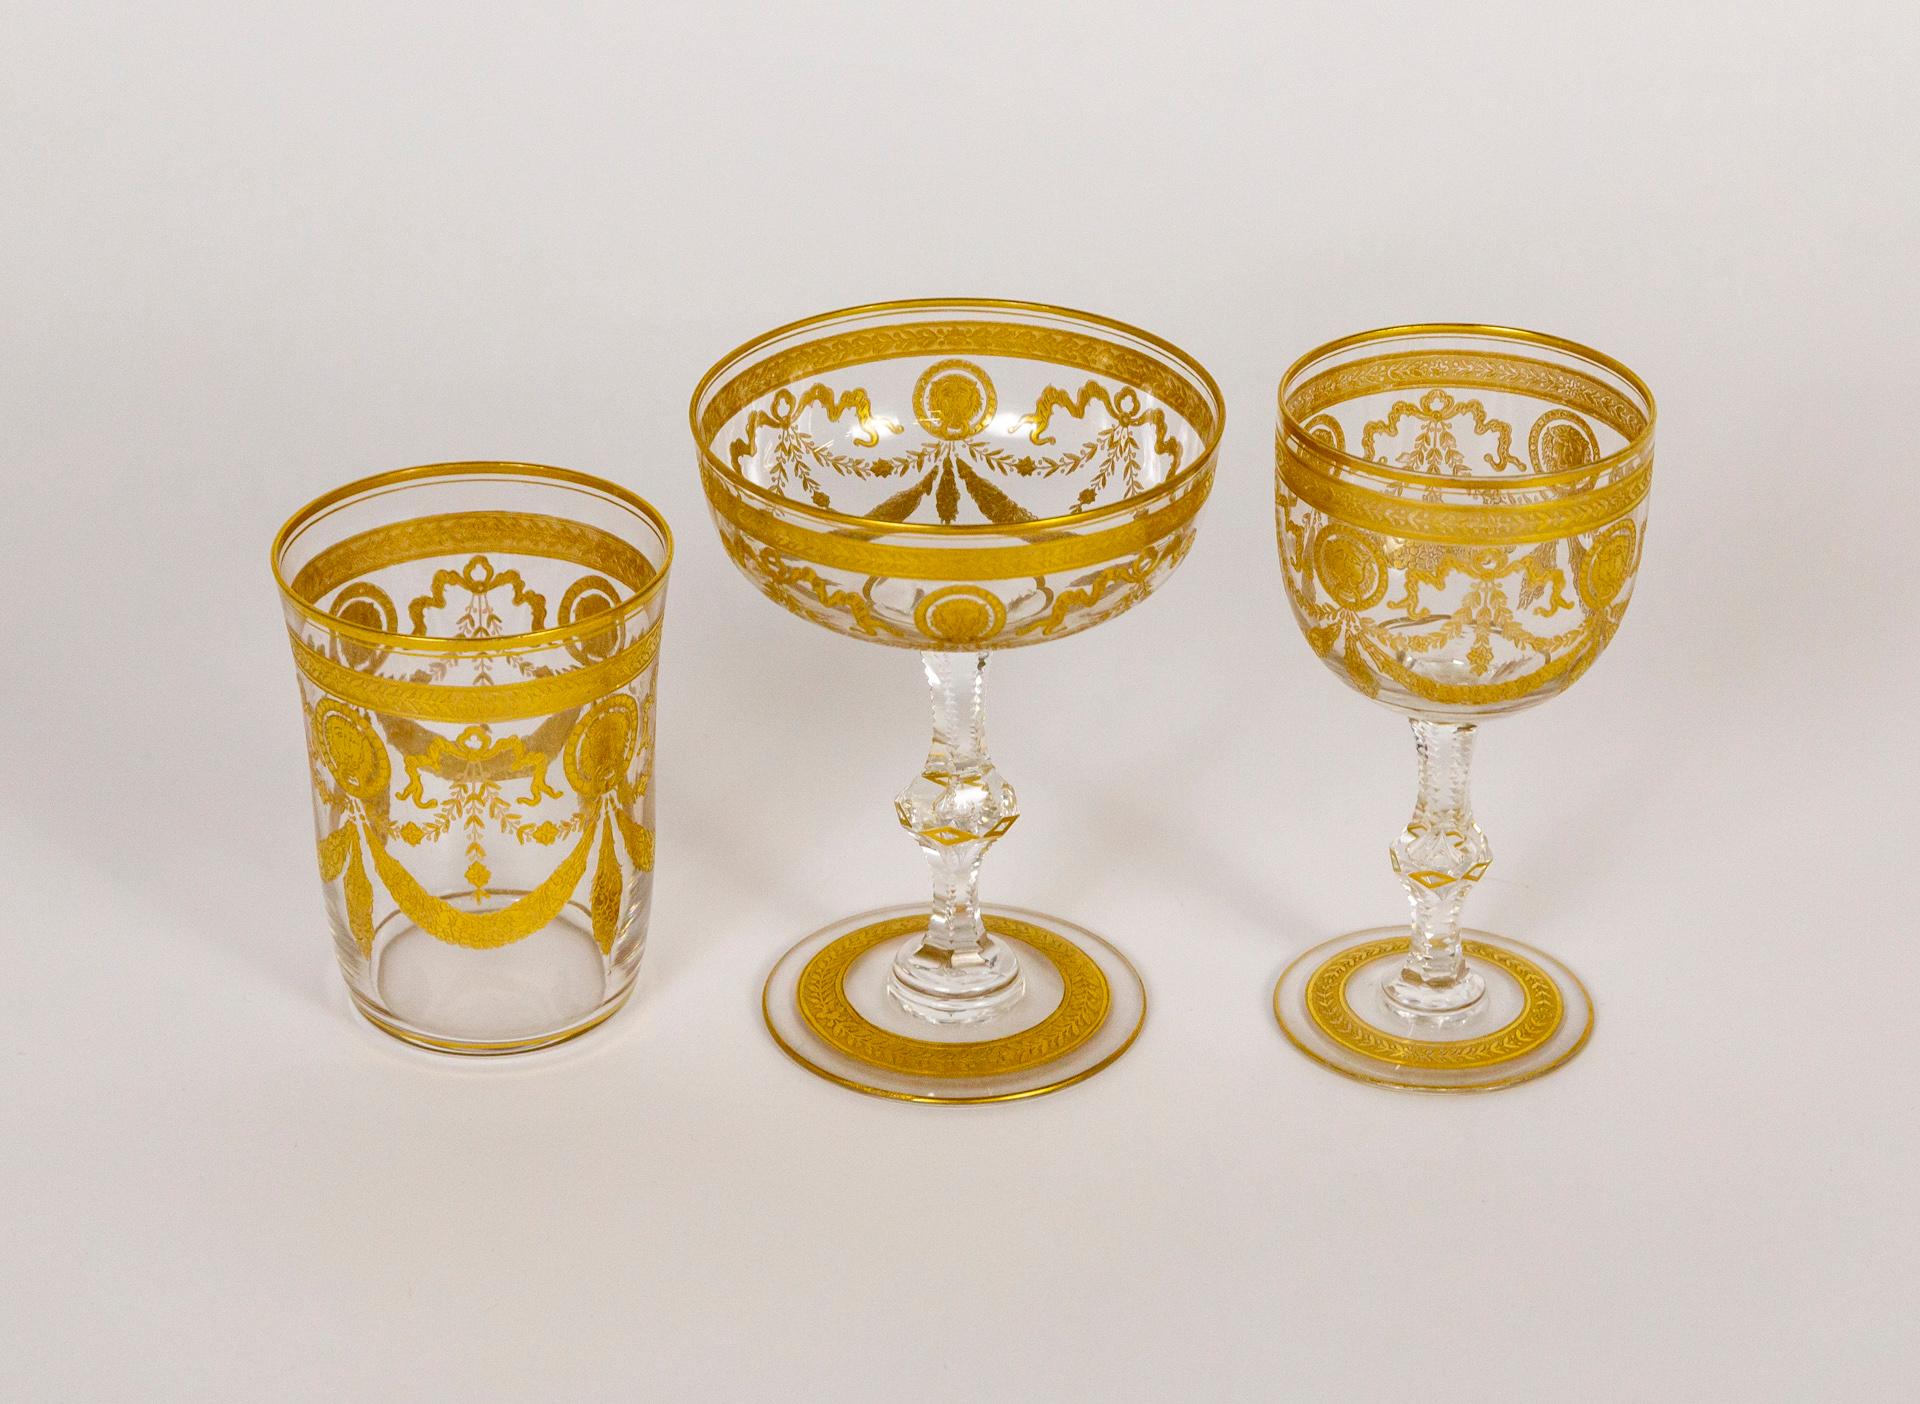 Congress Style Gilt Crystal Coupe Champagne Glasses by Saint-Louis, Set of 2 For Sale 4